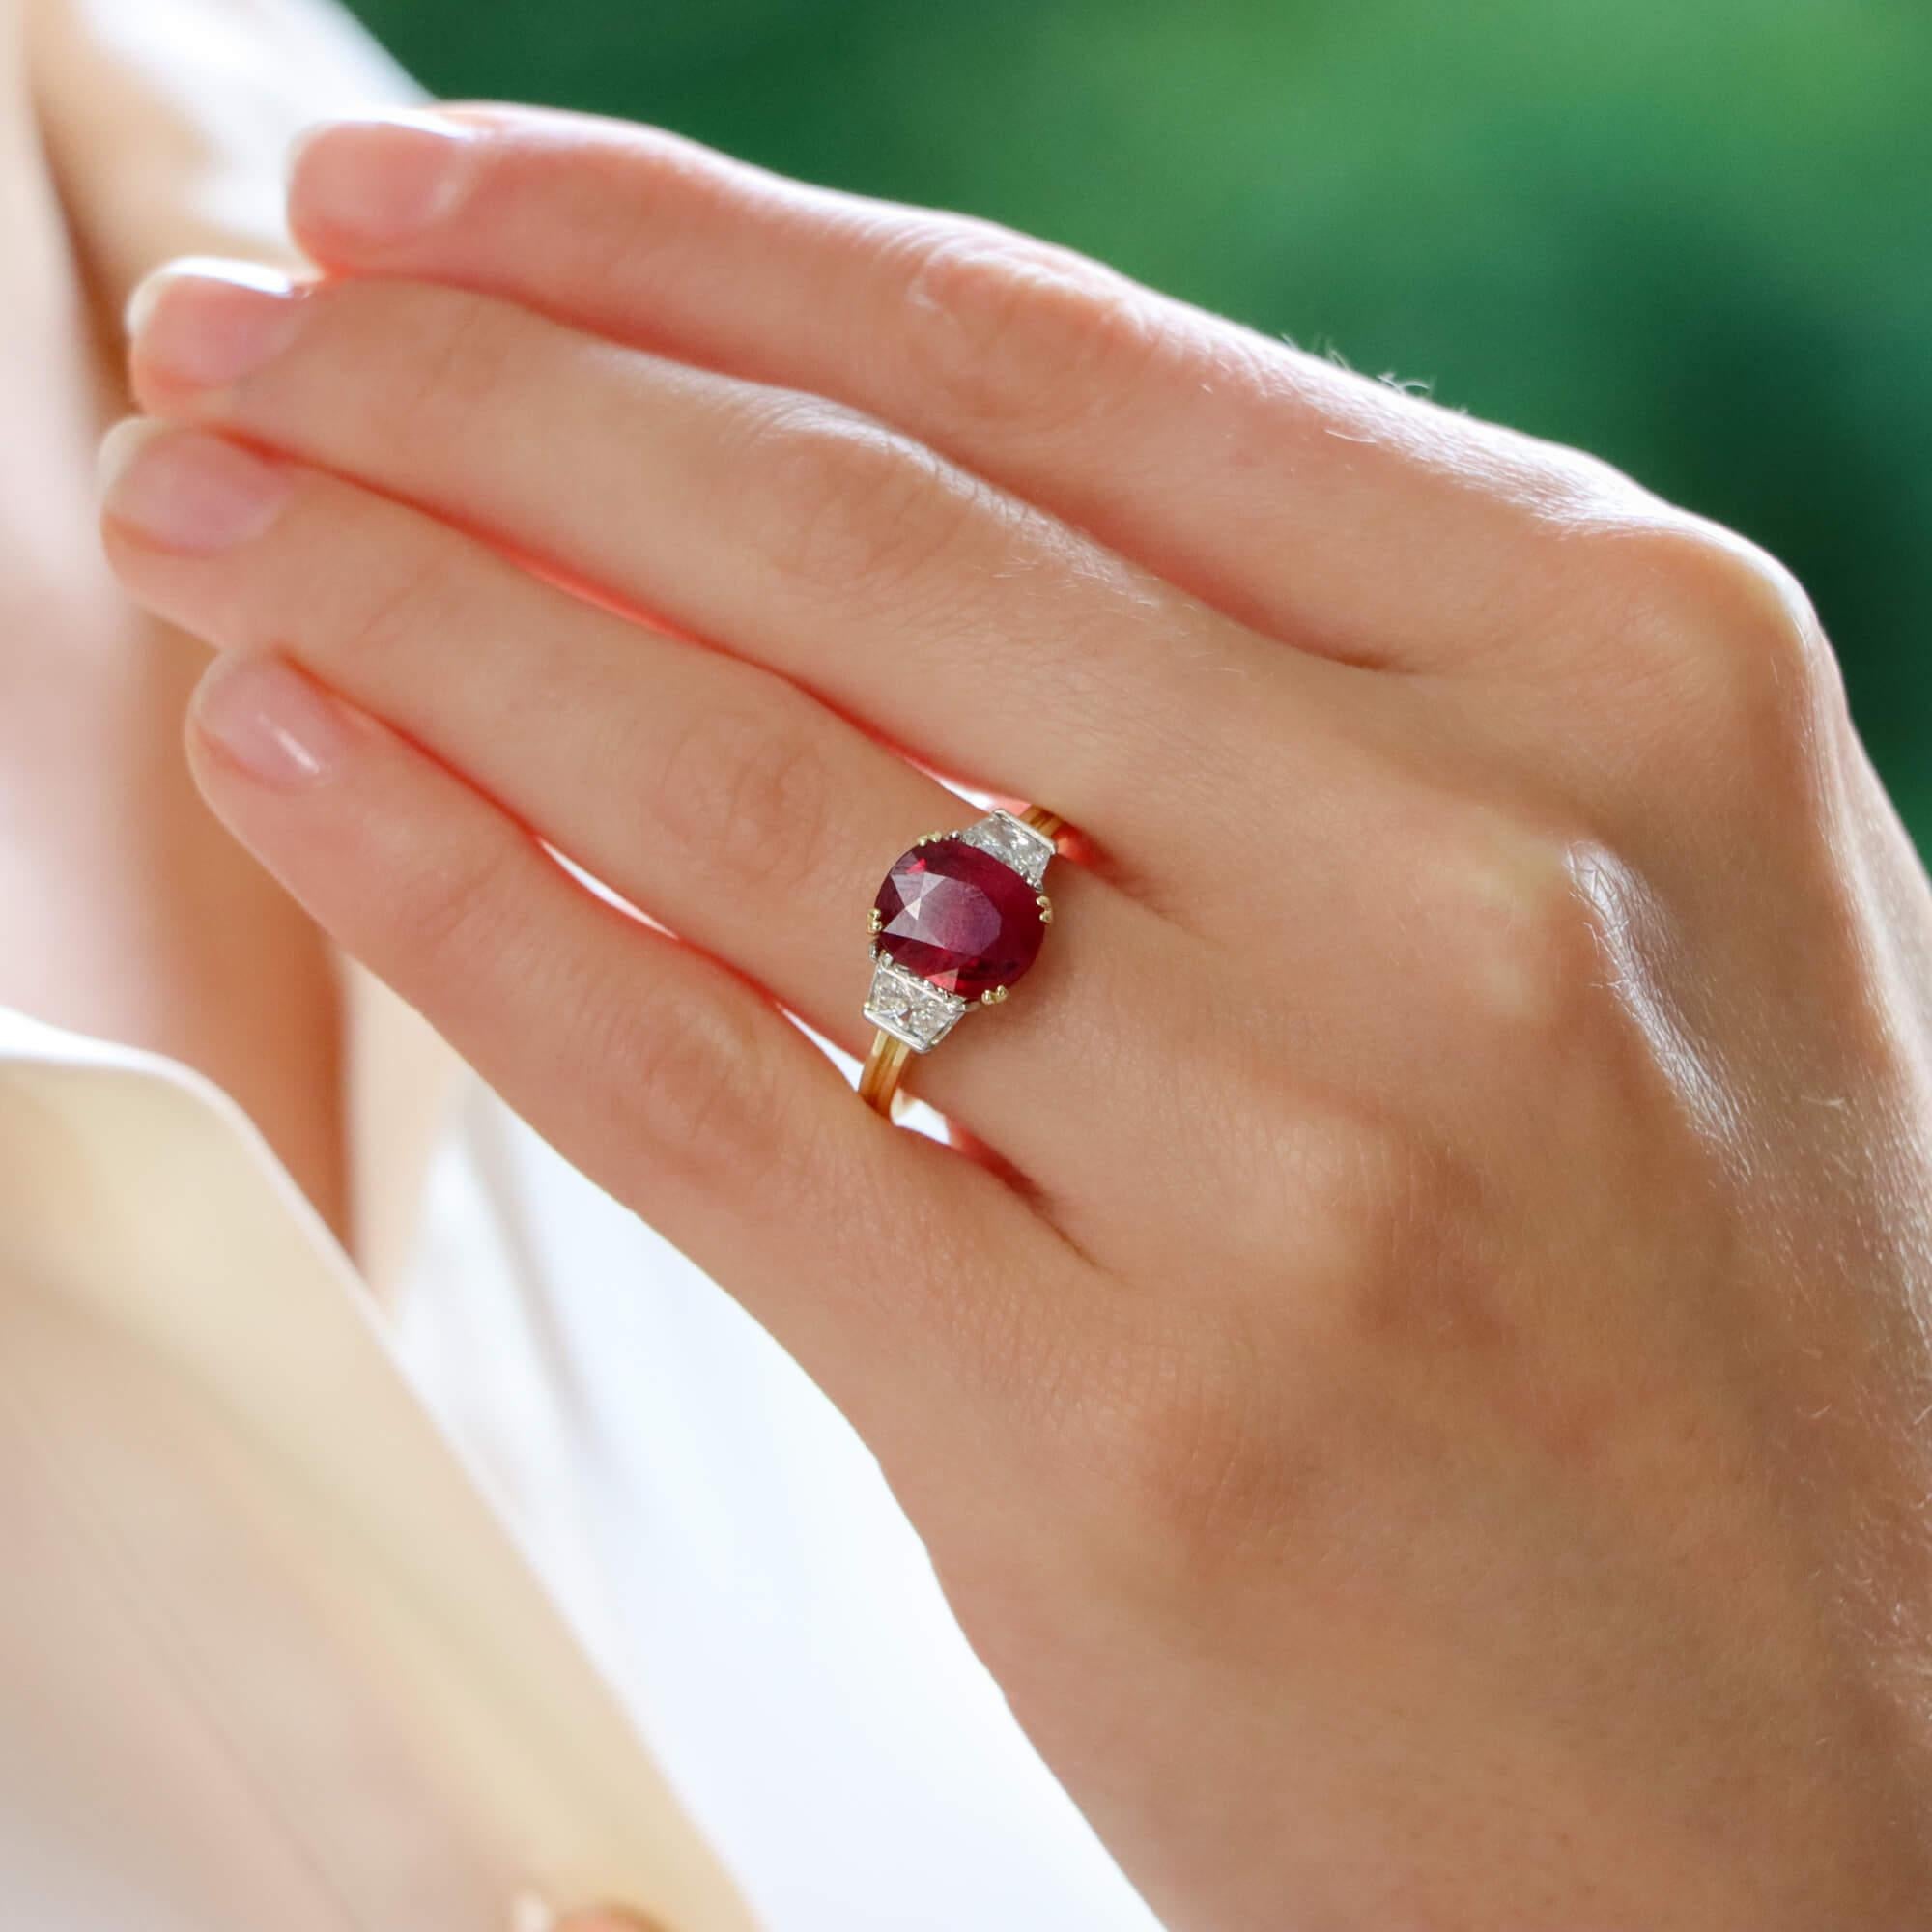 A beautiful ruby and diamond trilogy ring set in 18k yellow gold and platinum.

This classic ring design is centrally set with a astounding certified 3.05 carat oval cut vibrant ruby and is double four claw set in an open back triple setting. The